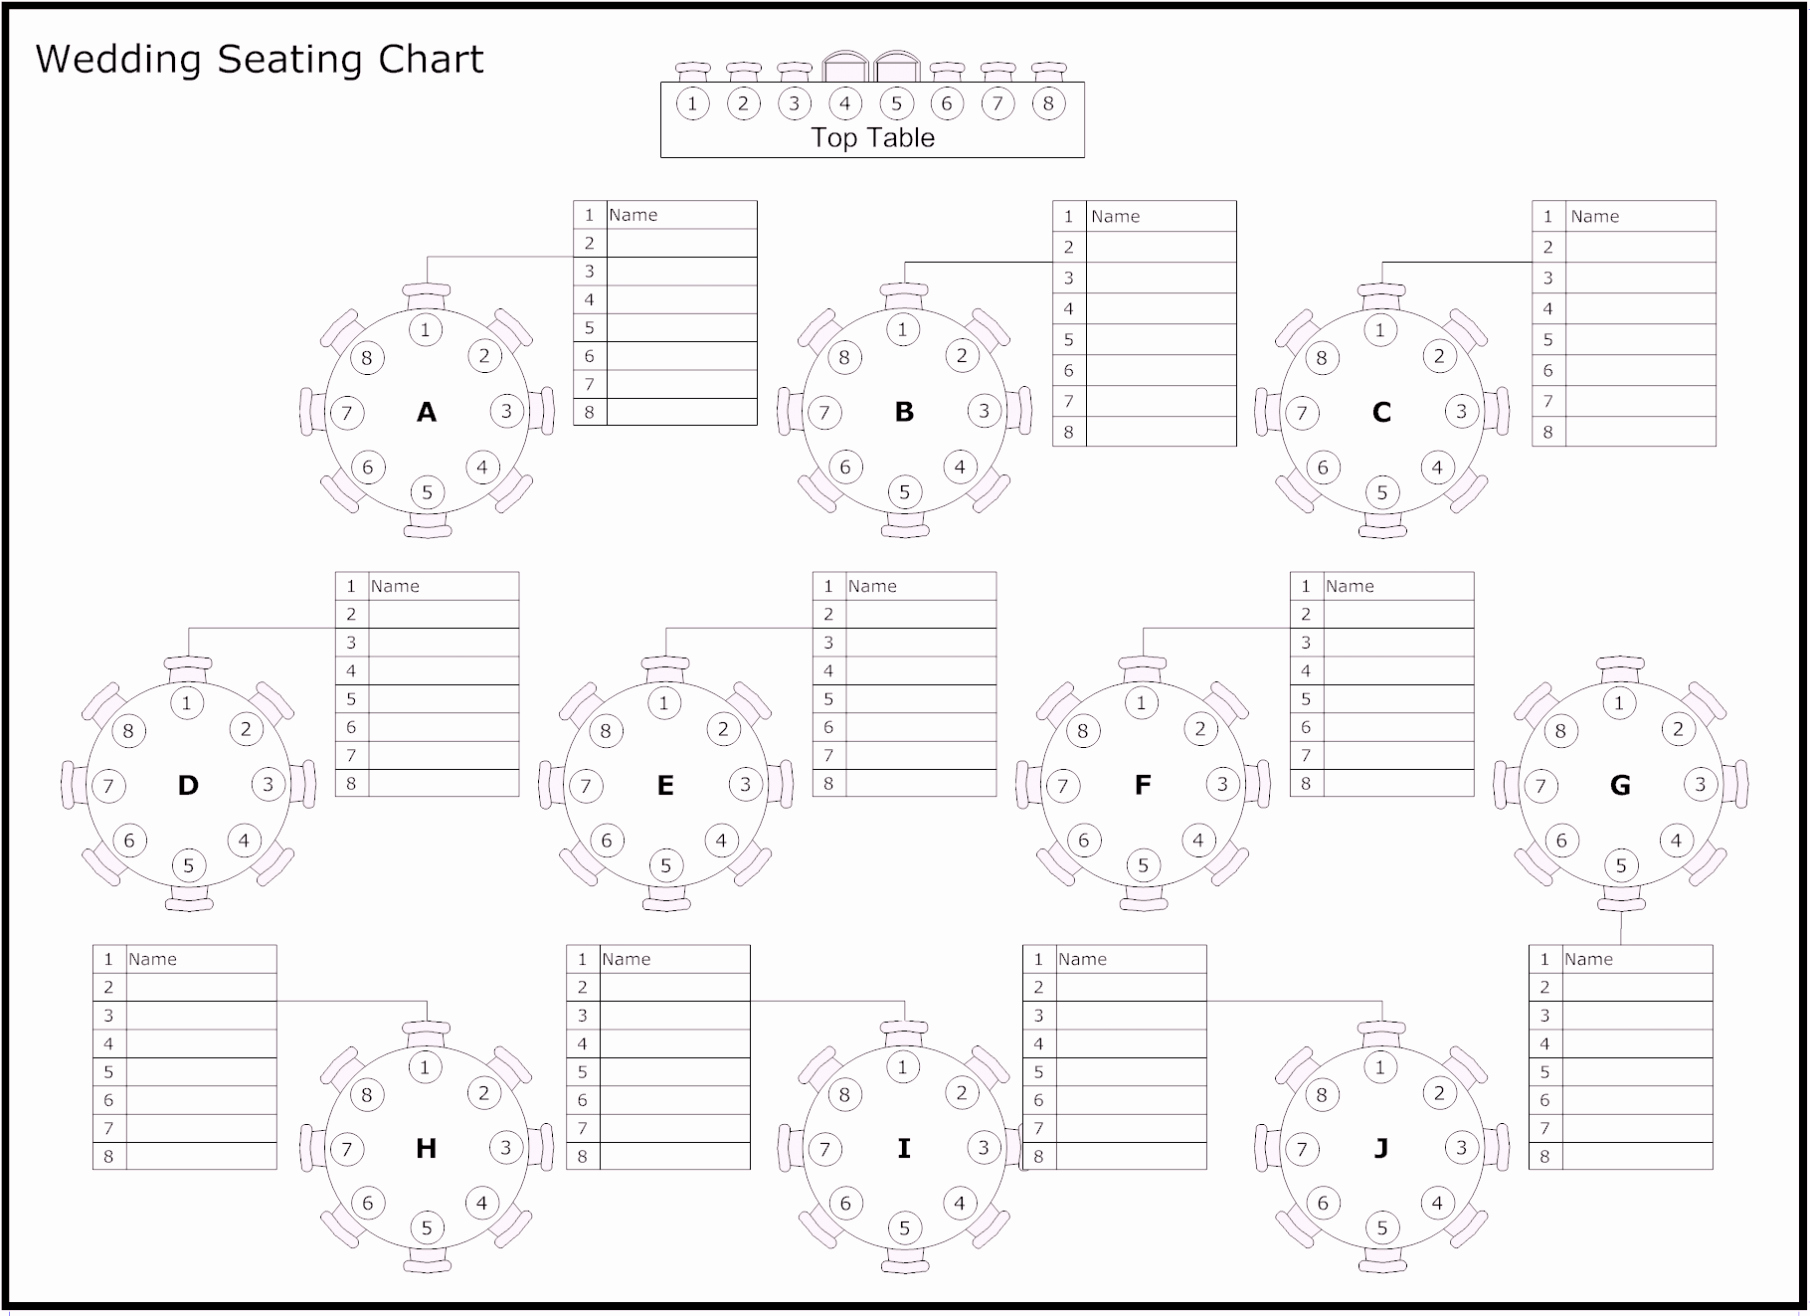 Online Wedding Seating Chart Template